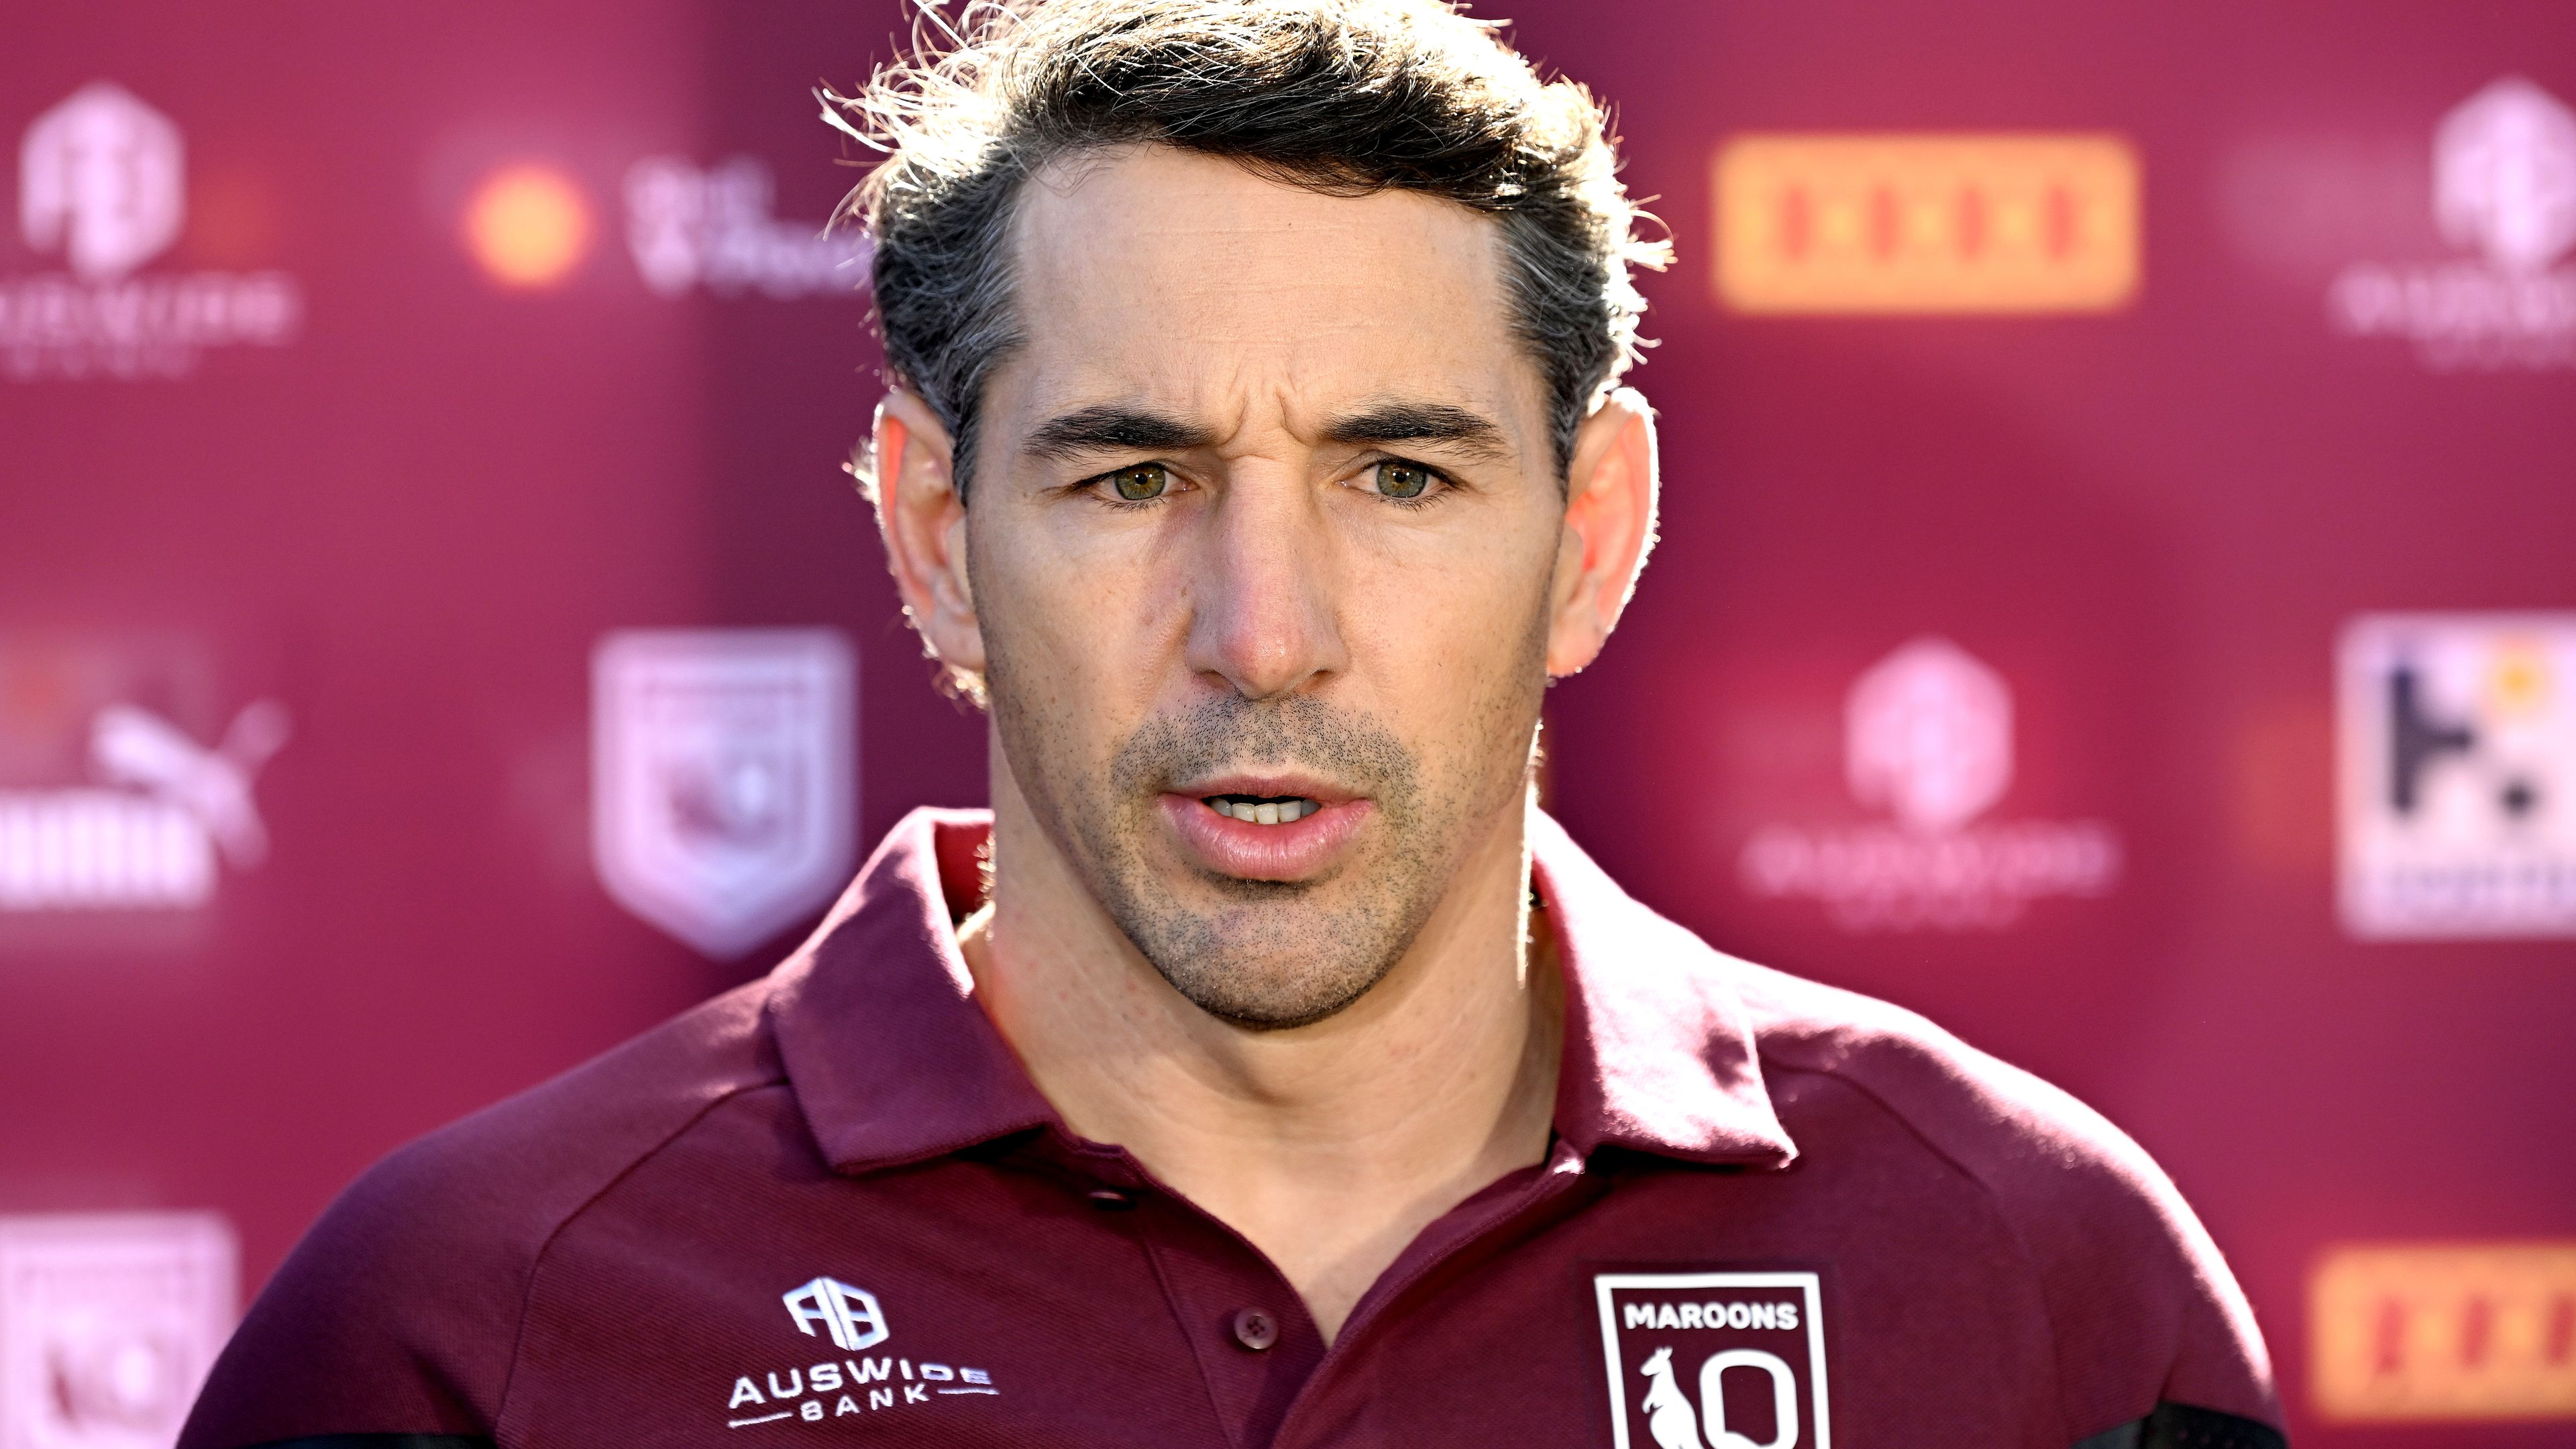 'It takes up a fair bit of time': Billy Slater not prepared to confirm Maroons extension despite Origin success